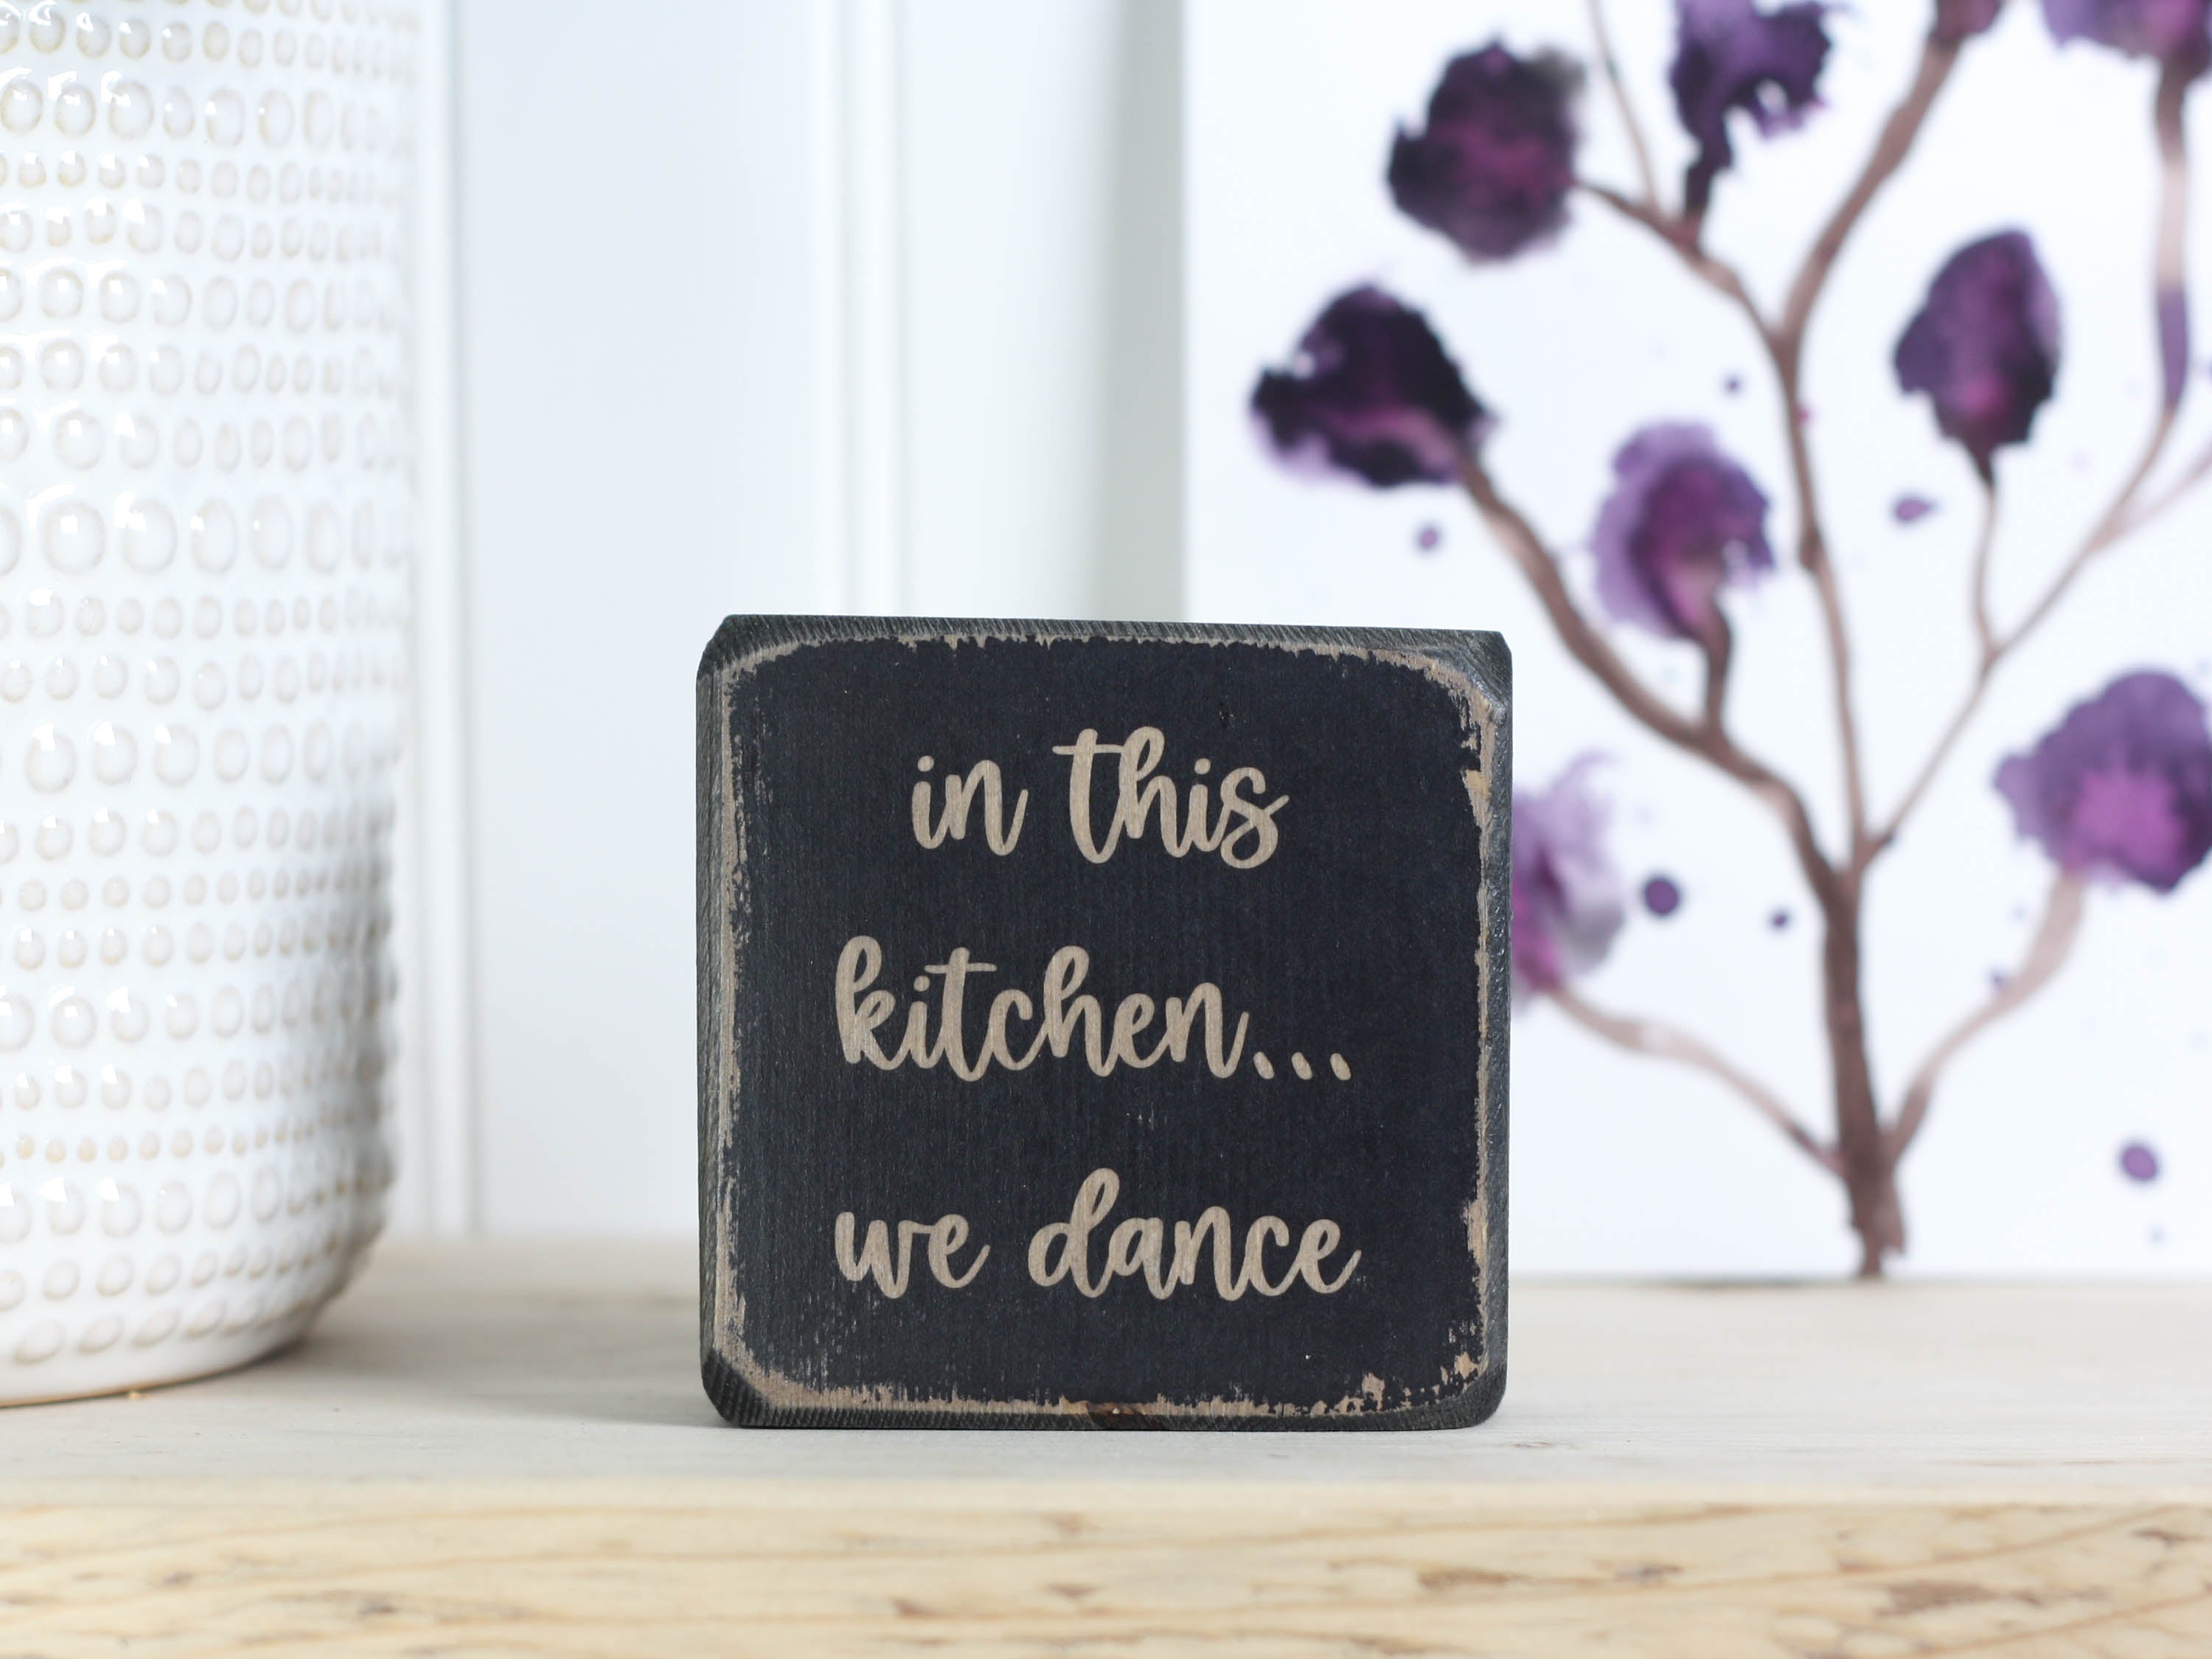 Small wooden decor in distressed black with the saying "in this kitchen... we dance"